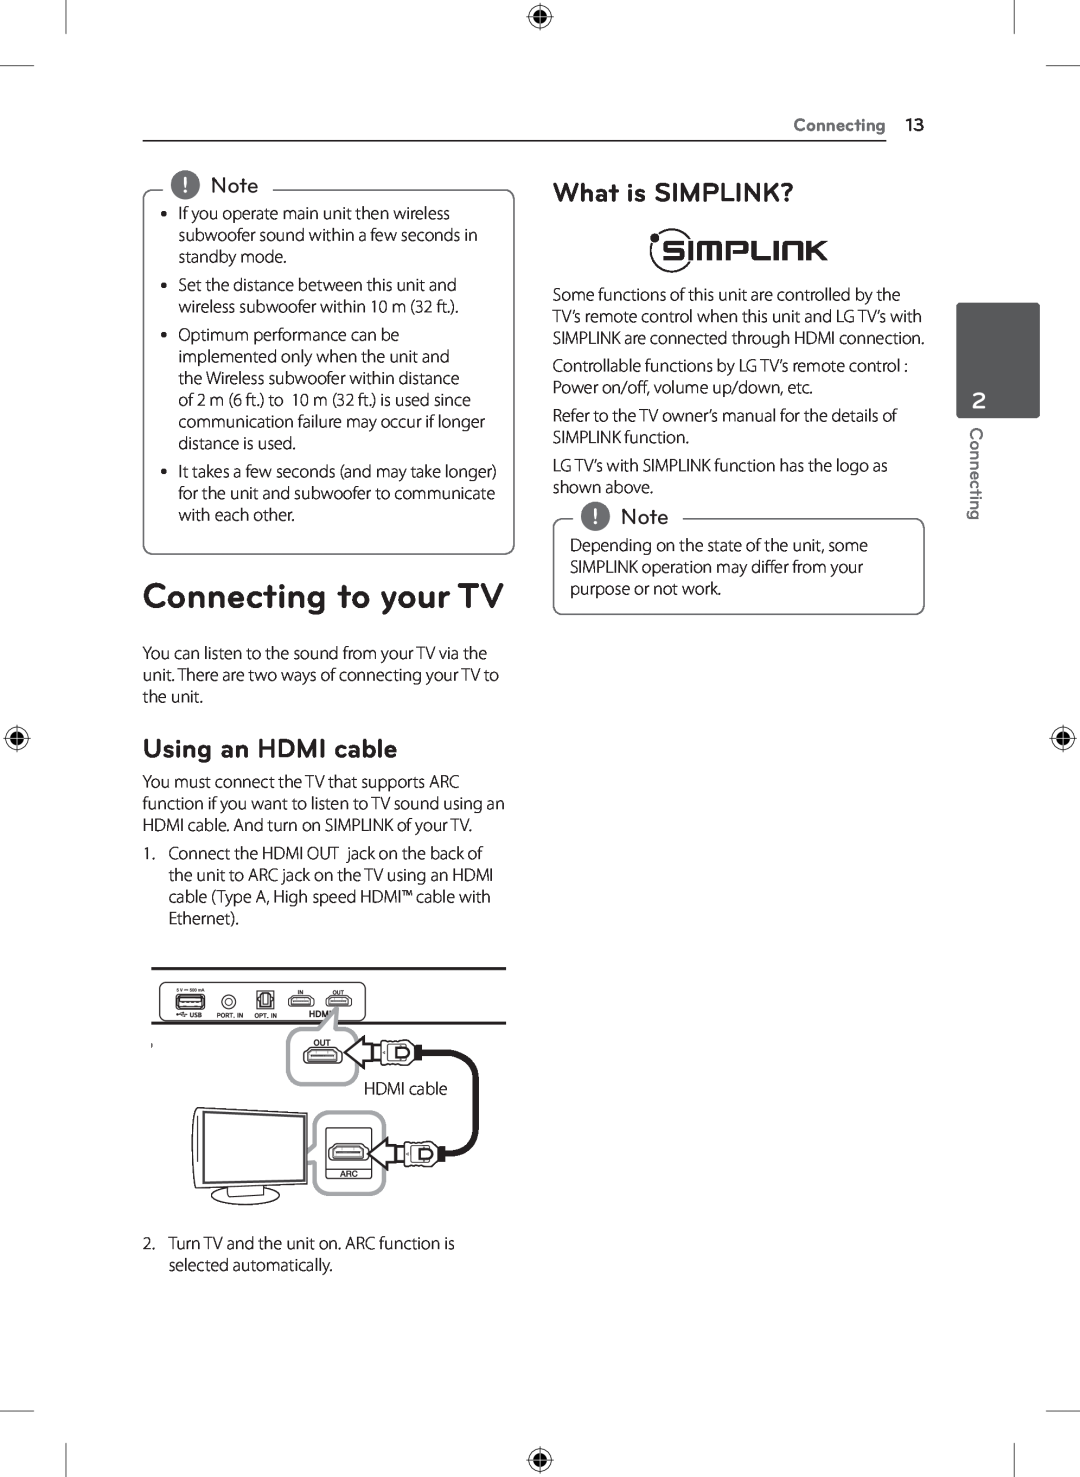 LG Electronics NB4530A, S43A1-D owner manual Connecting to your TV, Using an HDMI cable, What is SIMPLINK? 